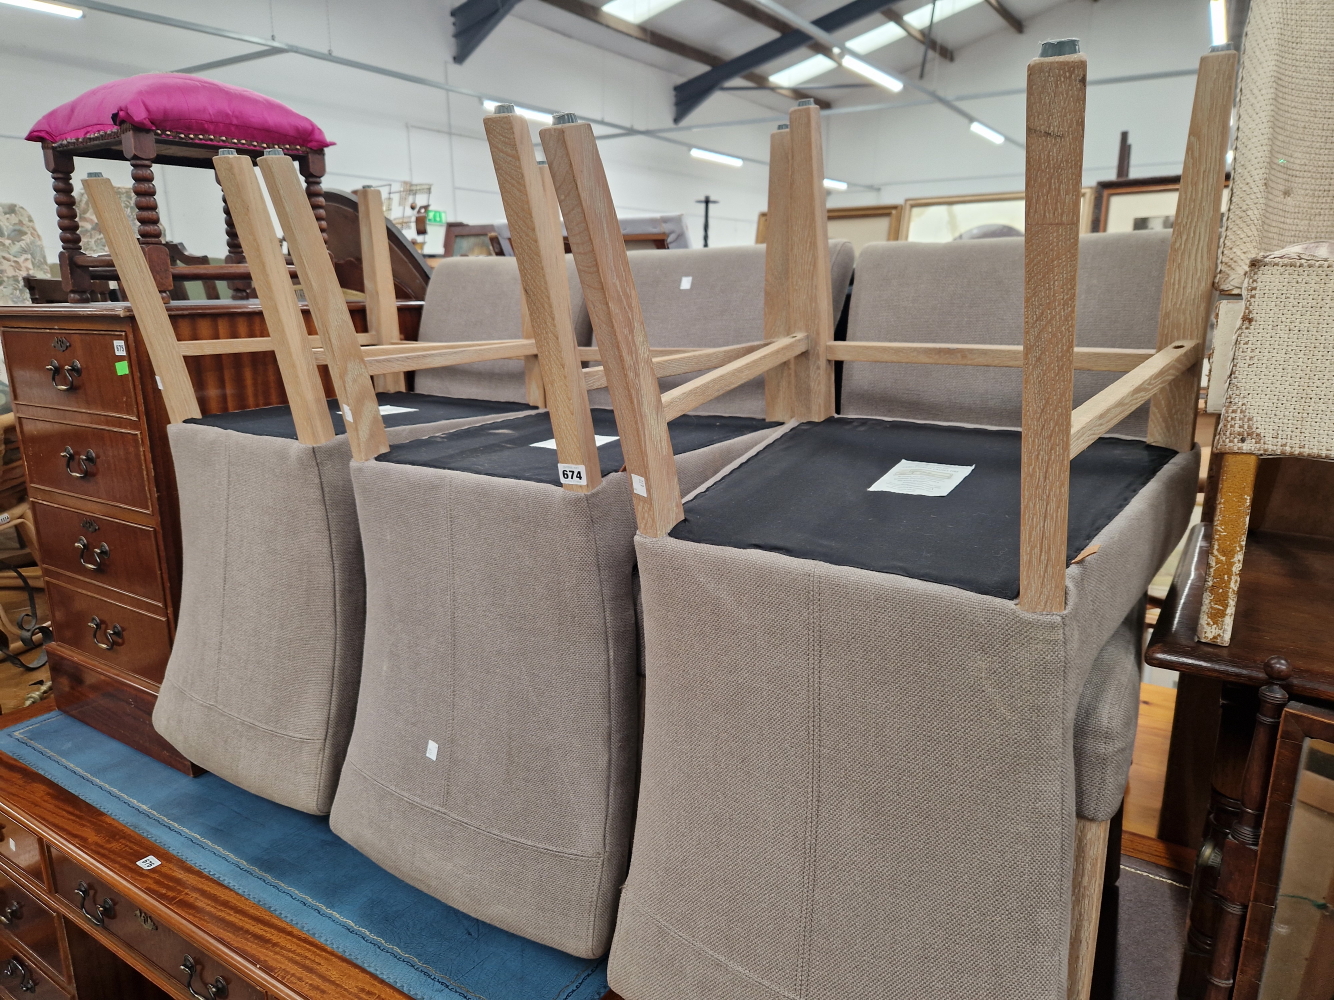 A SET OF SIX LIMED OAK CHAIRS WITH GREY UPHOLSTERED BACKS AND SEATS